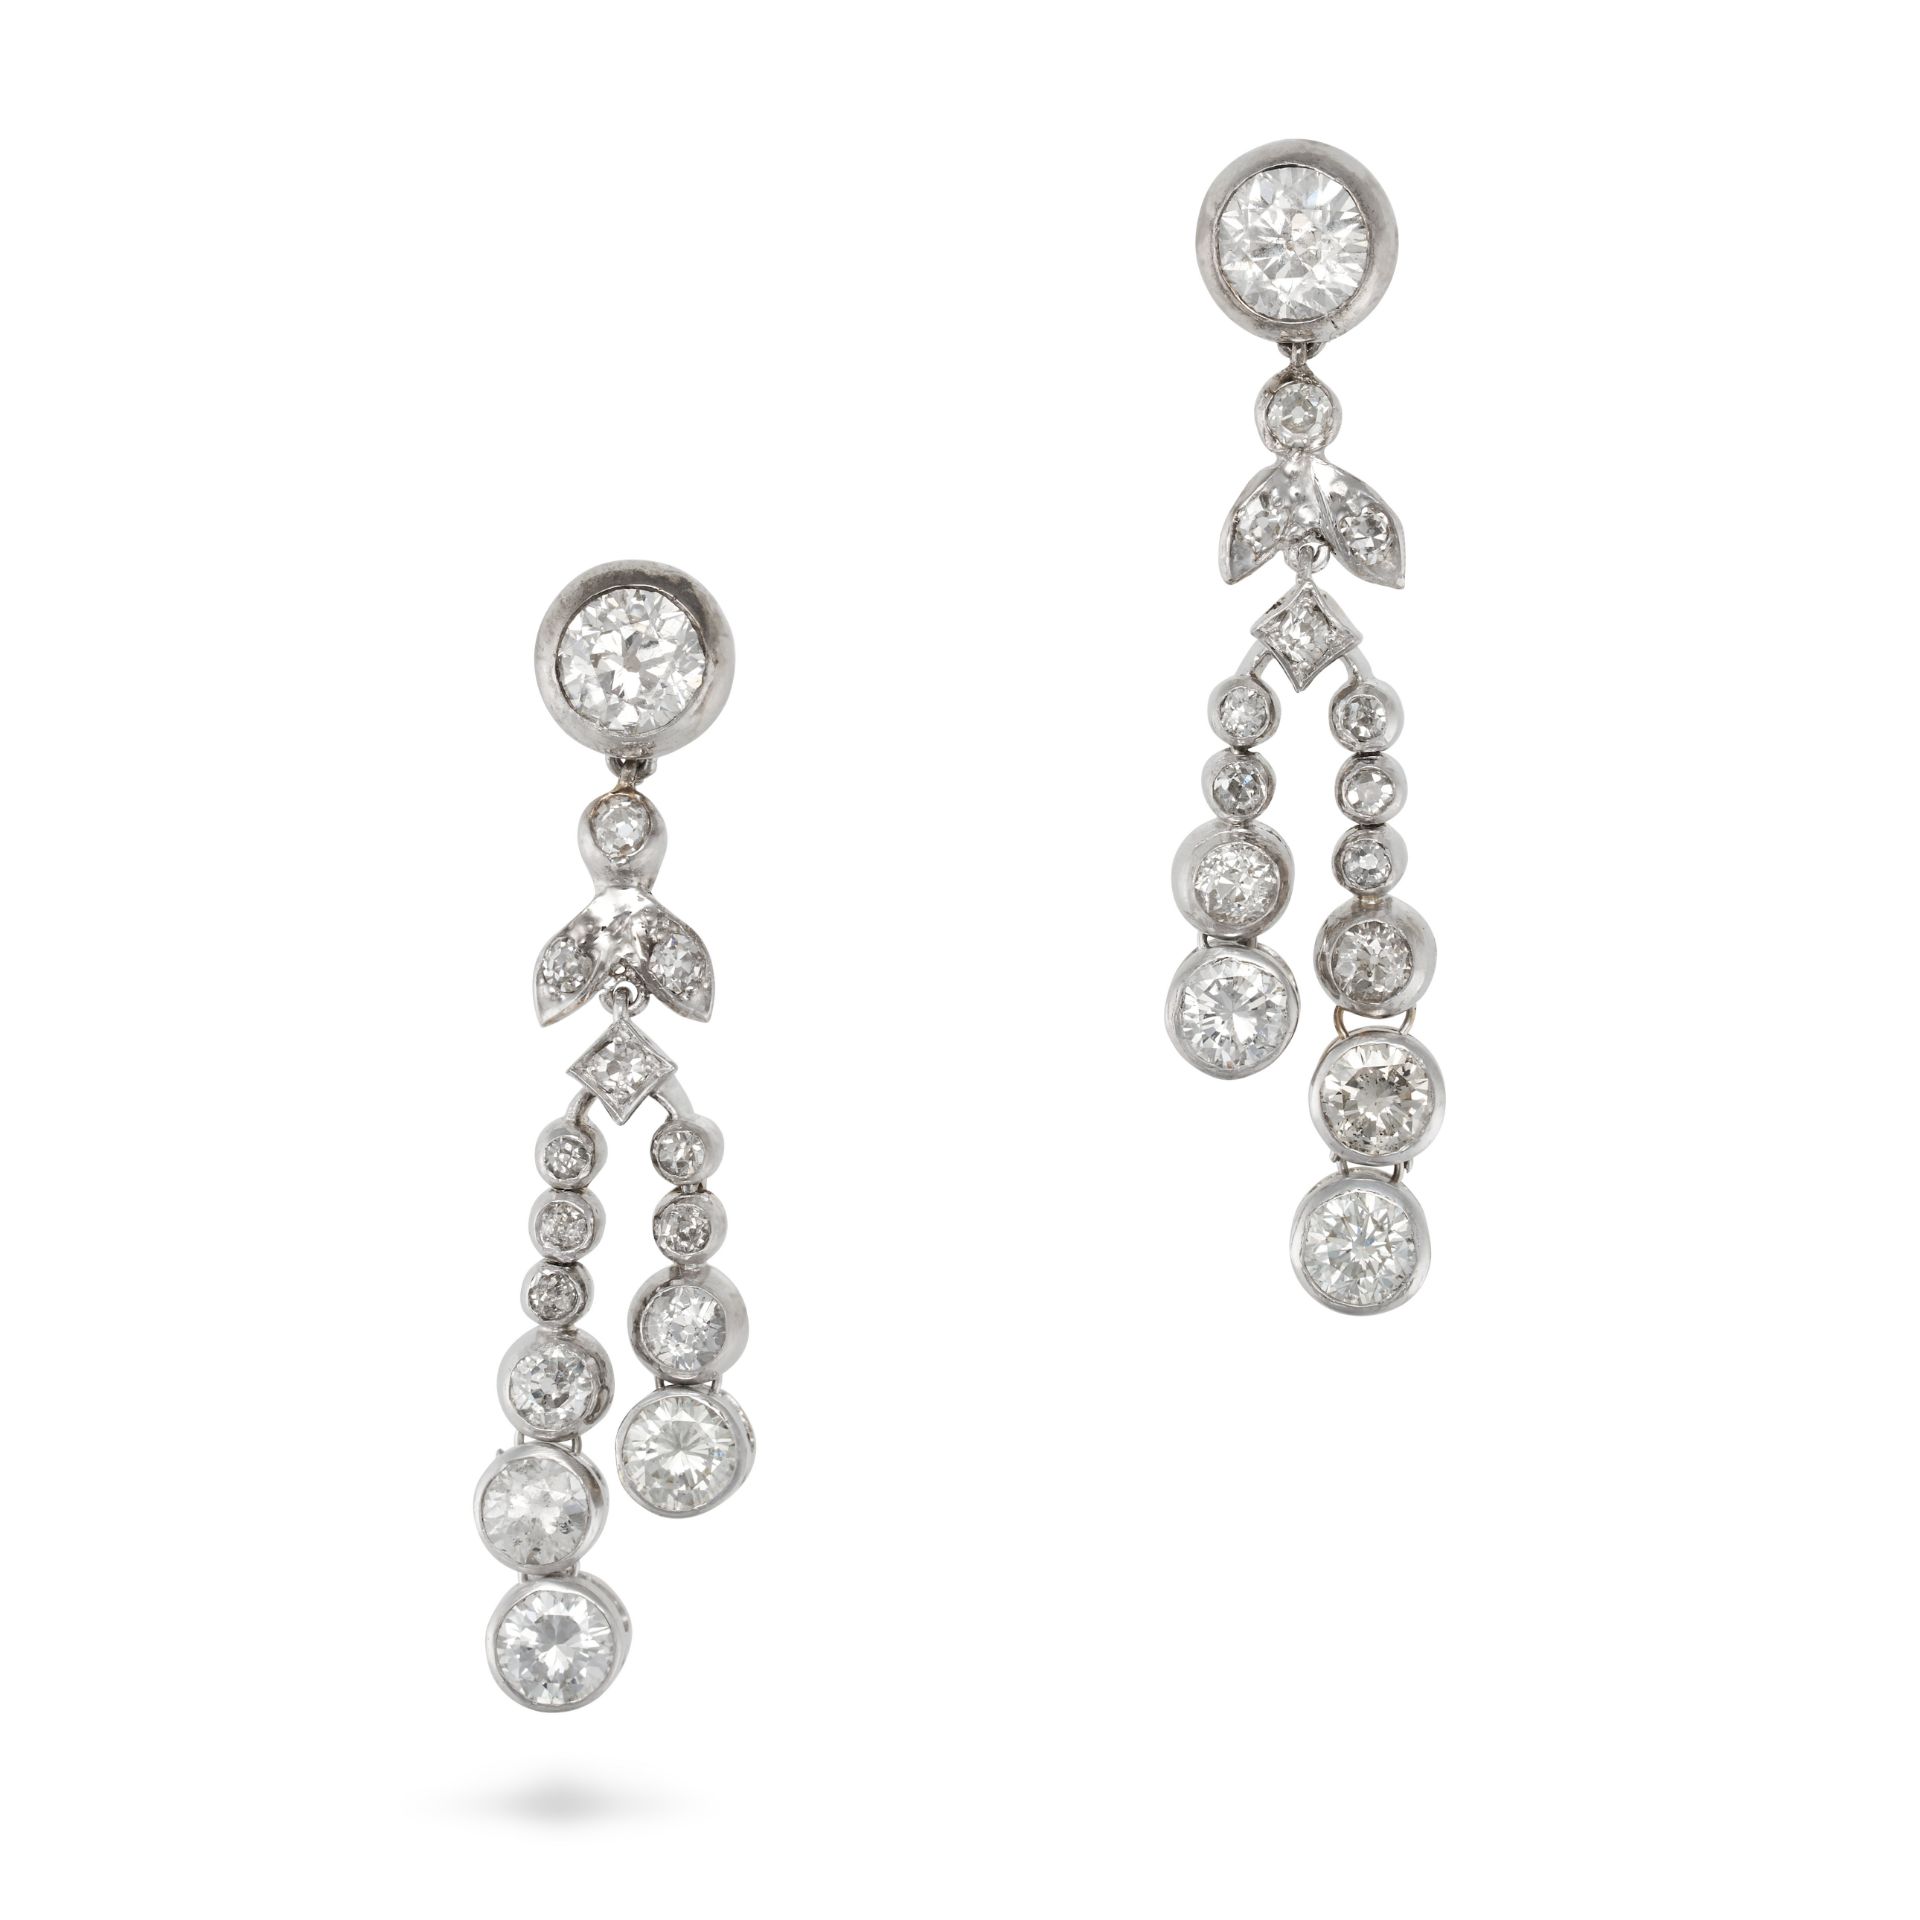 A PAIR OF DIAMOND DROP EARRINGS each set with a round brilliant cut diamond suspending two articu...